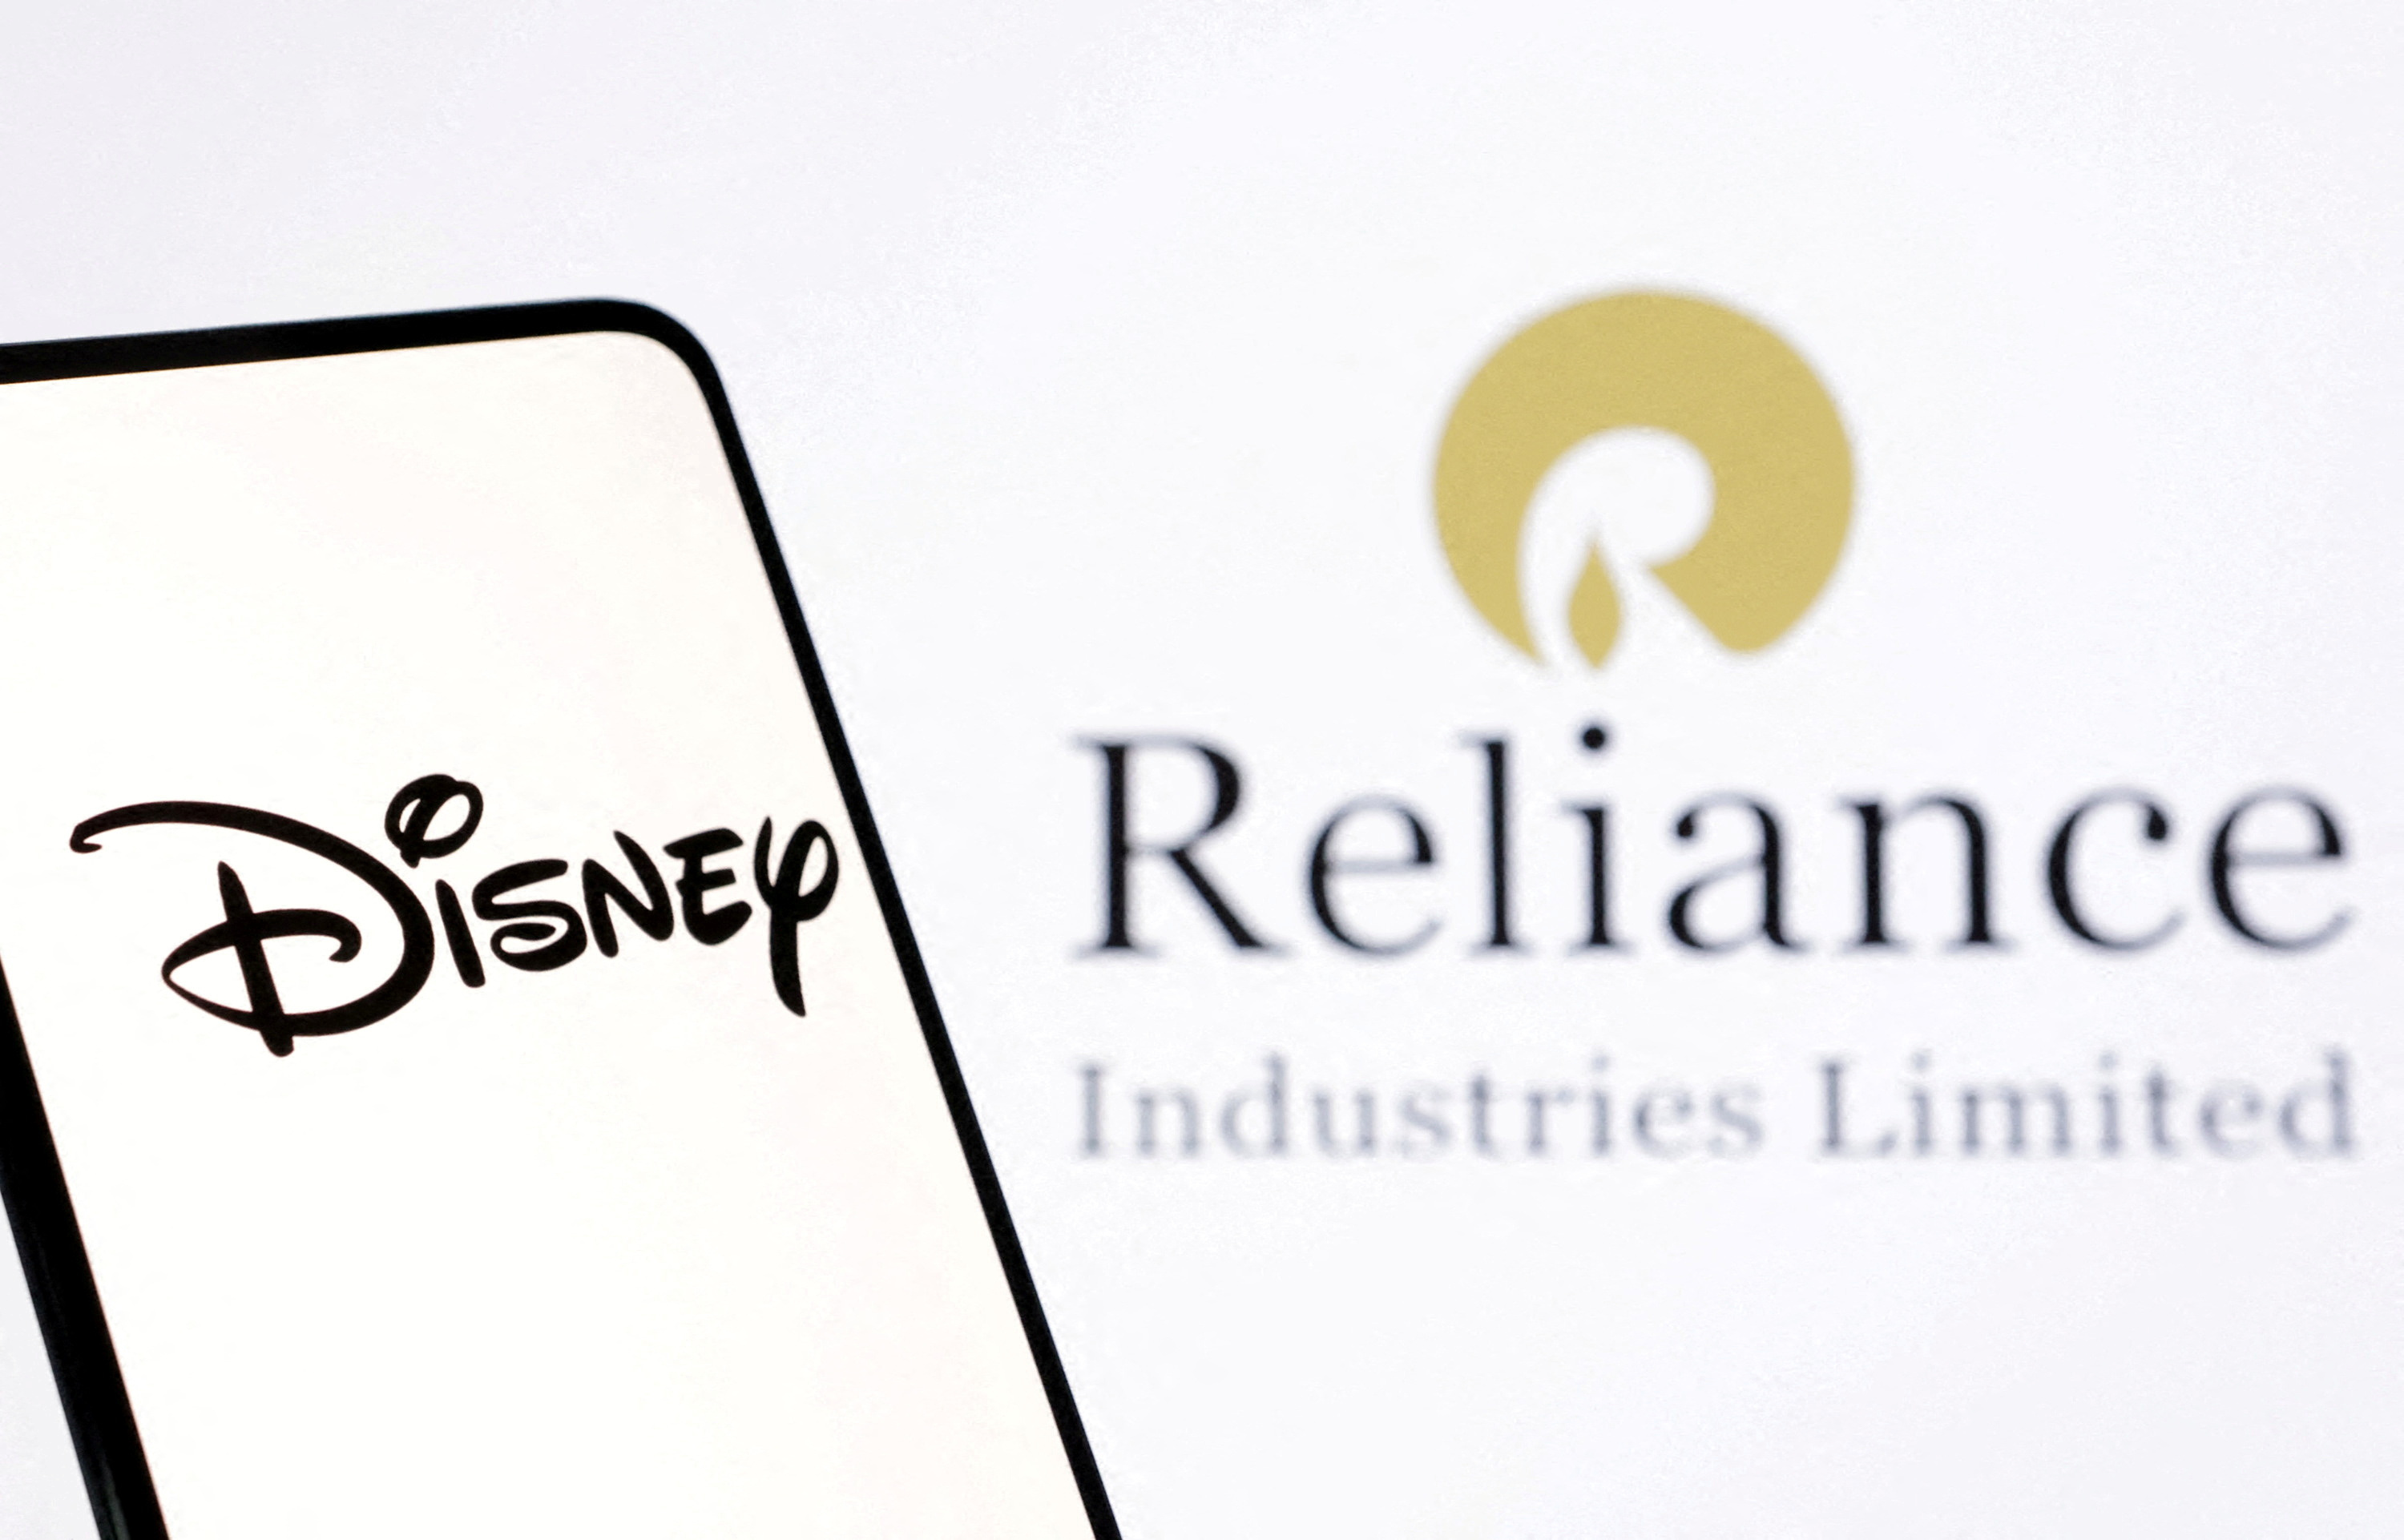 Reliance, Disney to merge India media assets to create $8.5